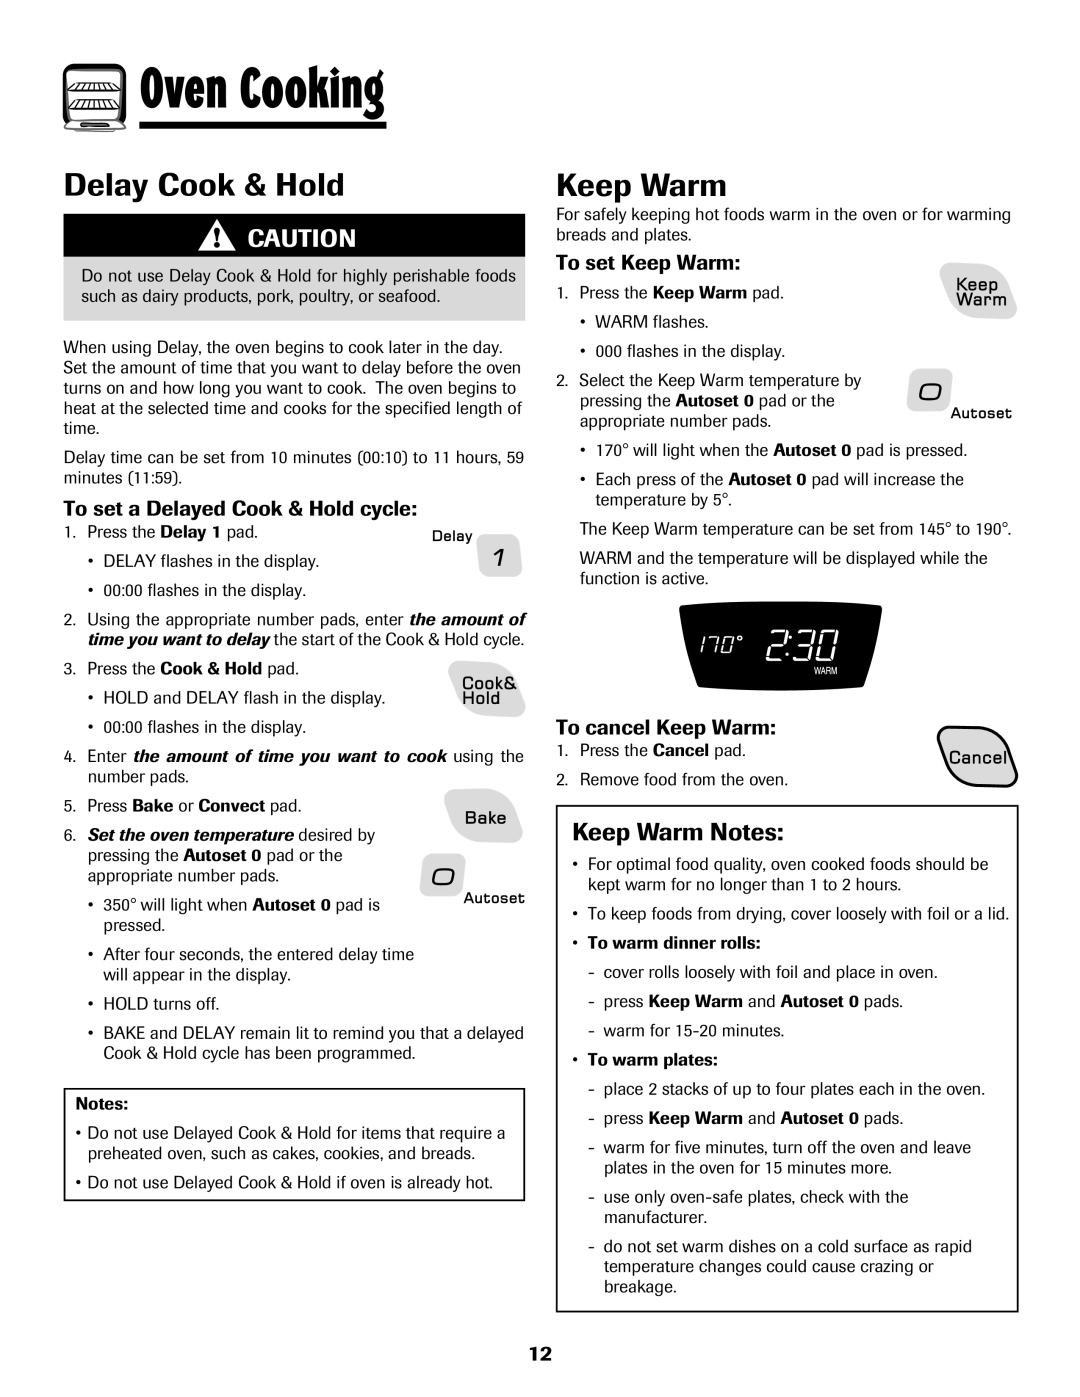 Amana 8113P487-60 Delay Cook & Hold, Keep Warm Notes, To set a Delayed Cook & Hold cycle, To set Keep Warm 